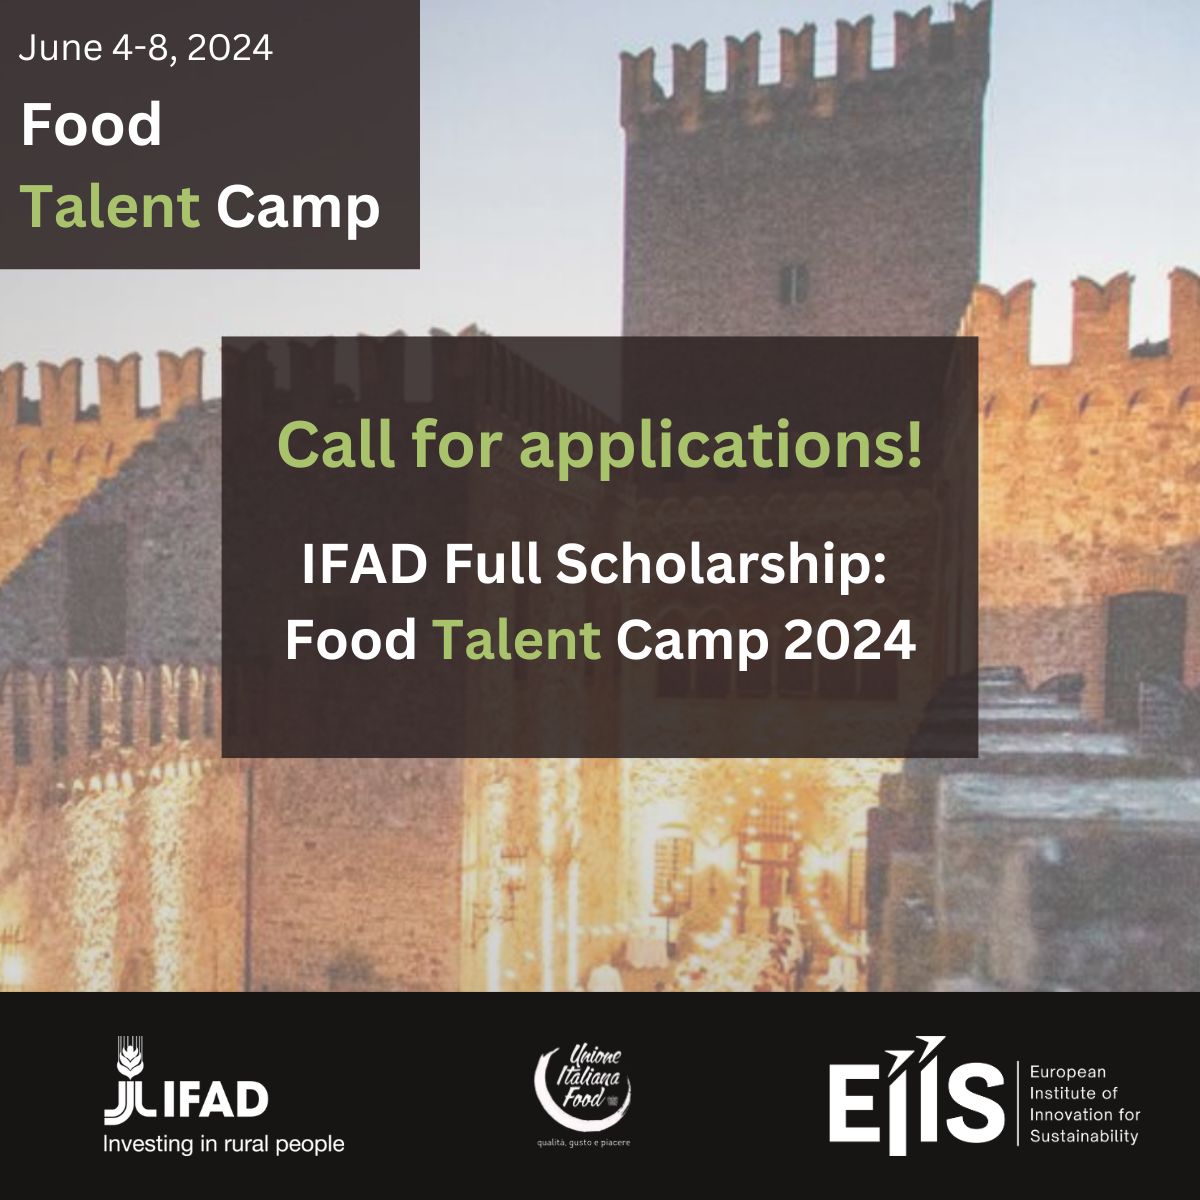 Don't miss out on a chance to win a FULL #SCHOLARSHIP for the #FoodTalentCamp 2024 sponsored by @IFAD in partnership with #EIIS! Apply by May 2nd at 23:59 CEST to be one of the lucky 20 participants to receive this prestigious scholarship! The Food Talent Camp is a four-day…